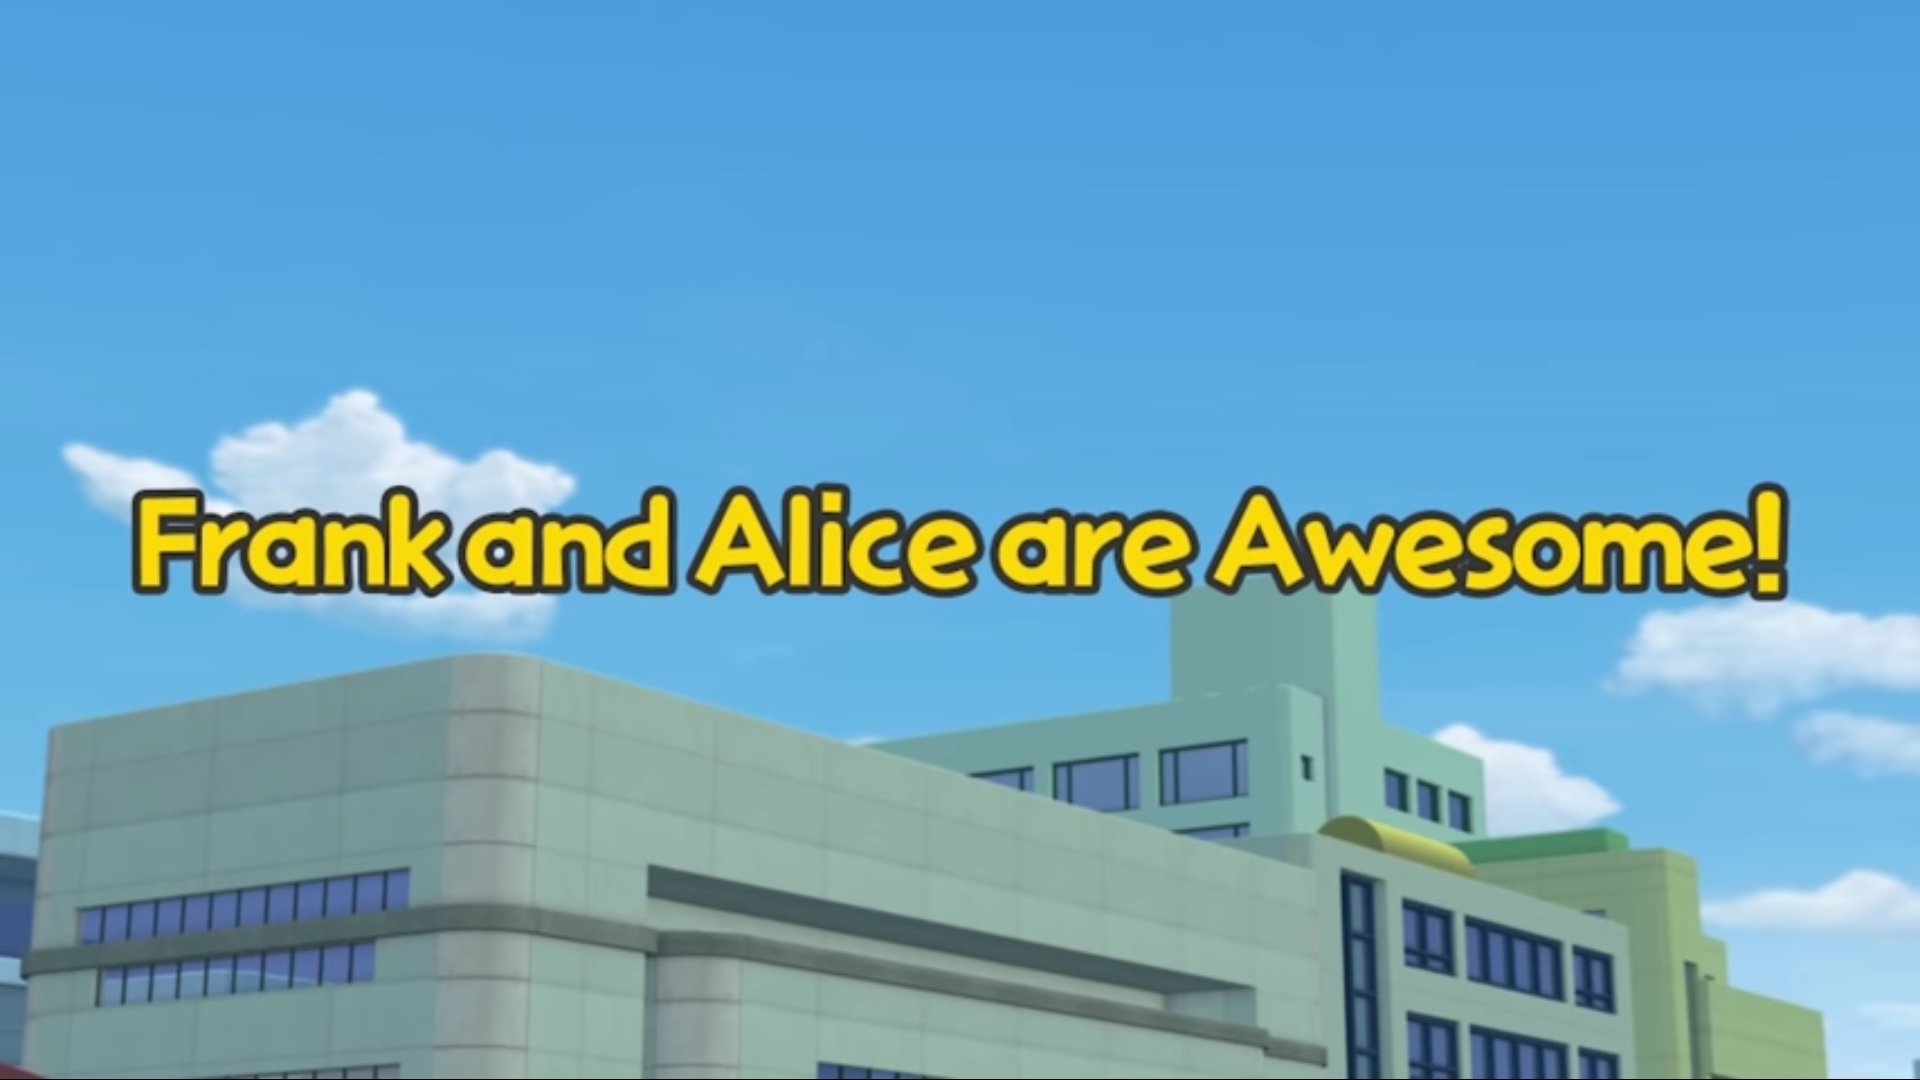 https://static.wikia.nocookie.net/tayothelittlebus/images/6/62/Frank_and_Alice_are_Awesome%21_Title_Card.jpg/revision/latest?cb=20220302073102